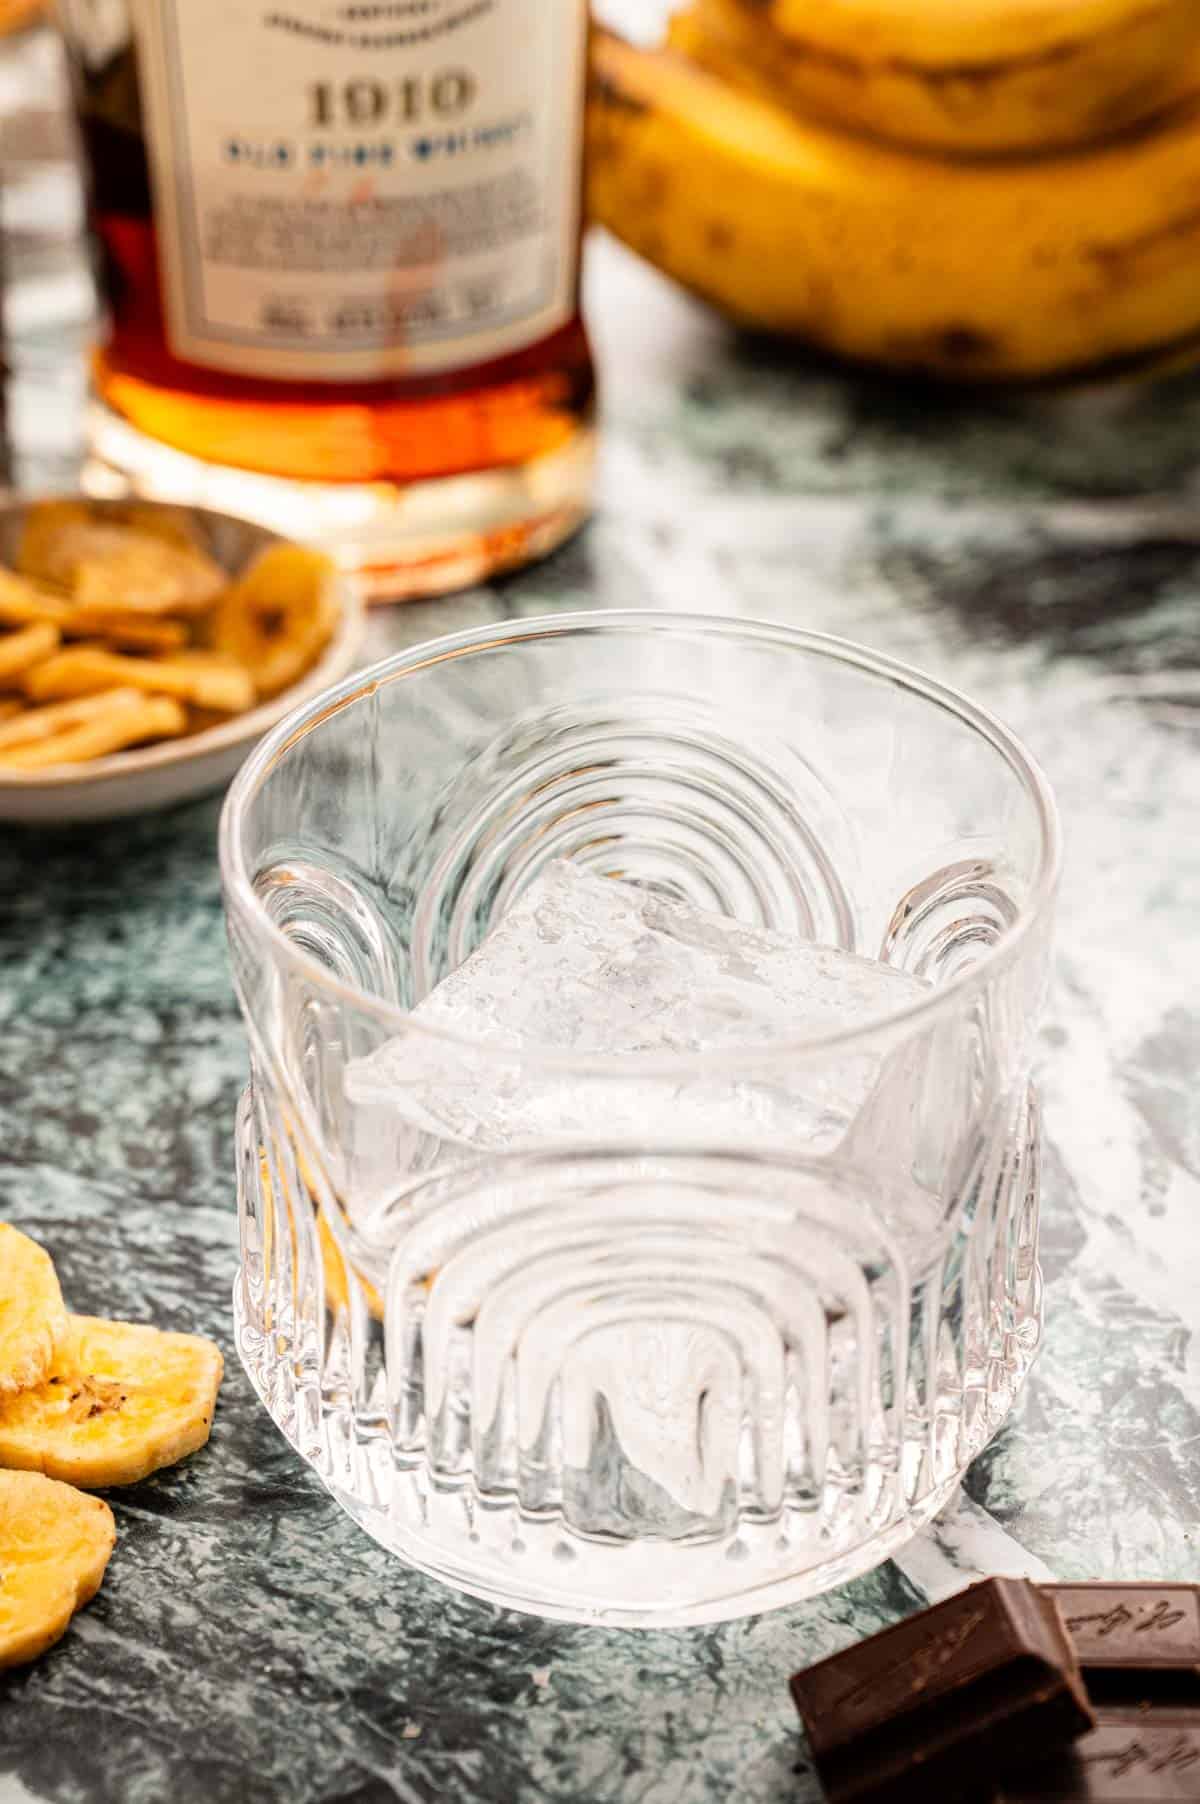 A large ice cube sitting in a rocks glass on a marble table.